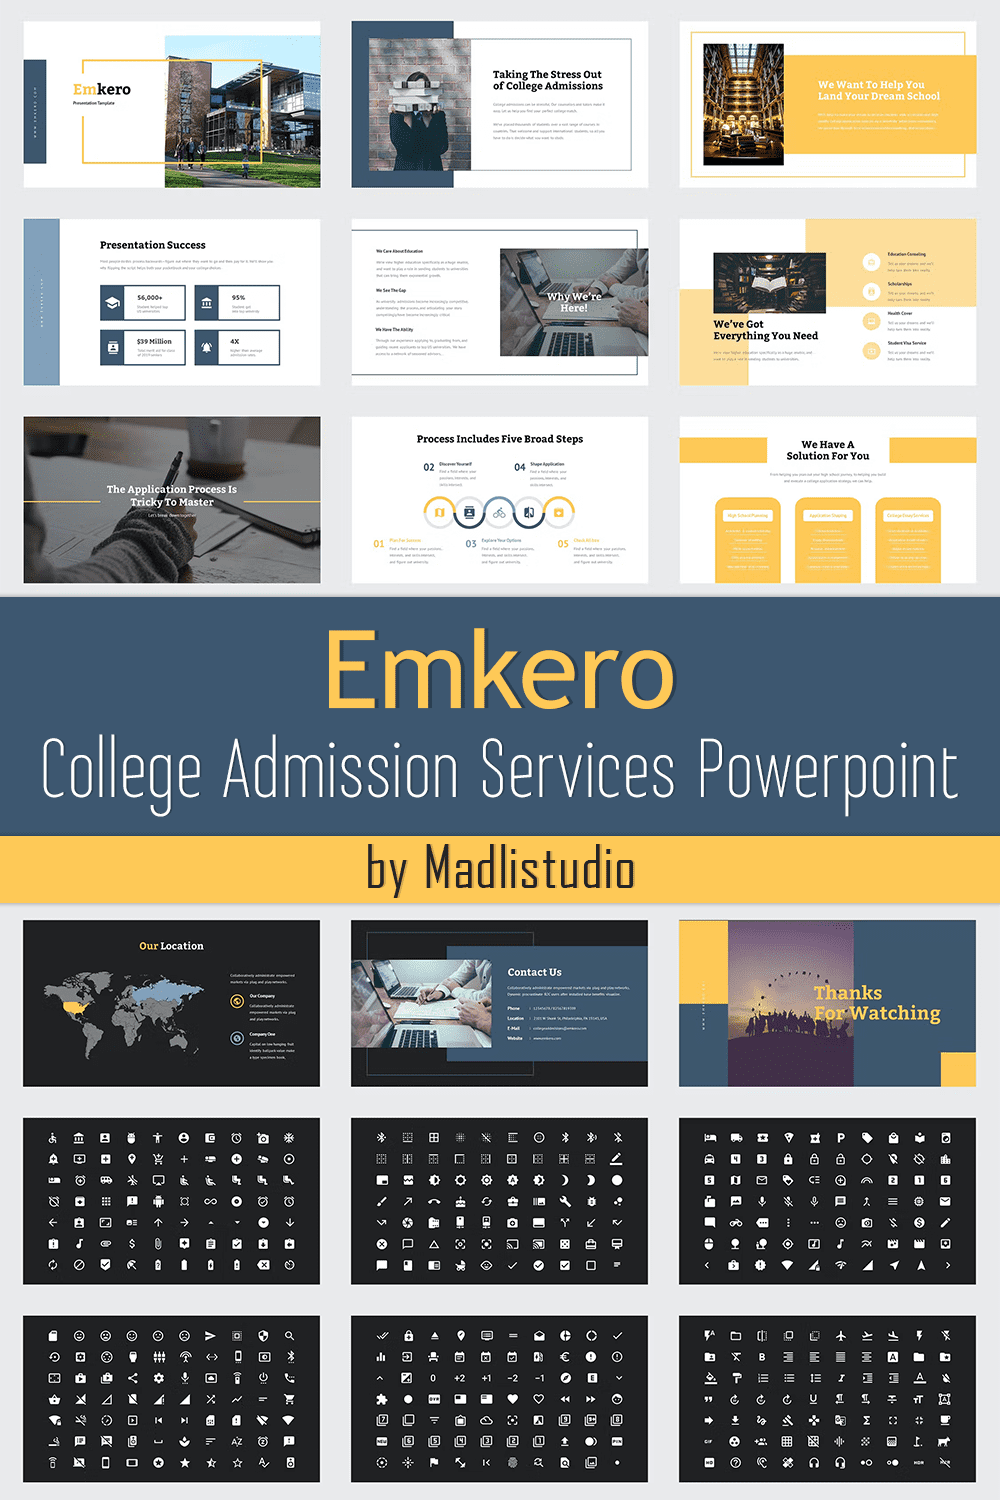 Emkero College Admission Services Powerpoint - pinterest image preview.